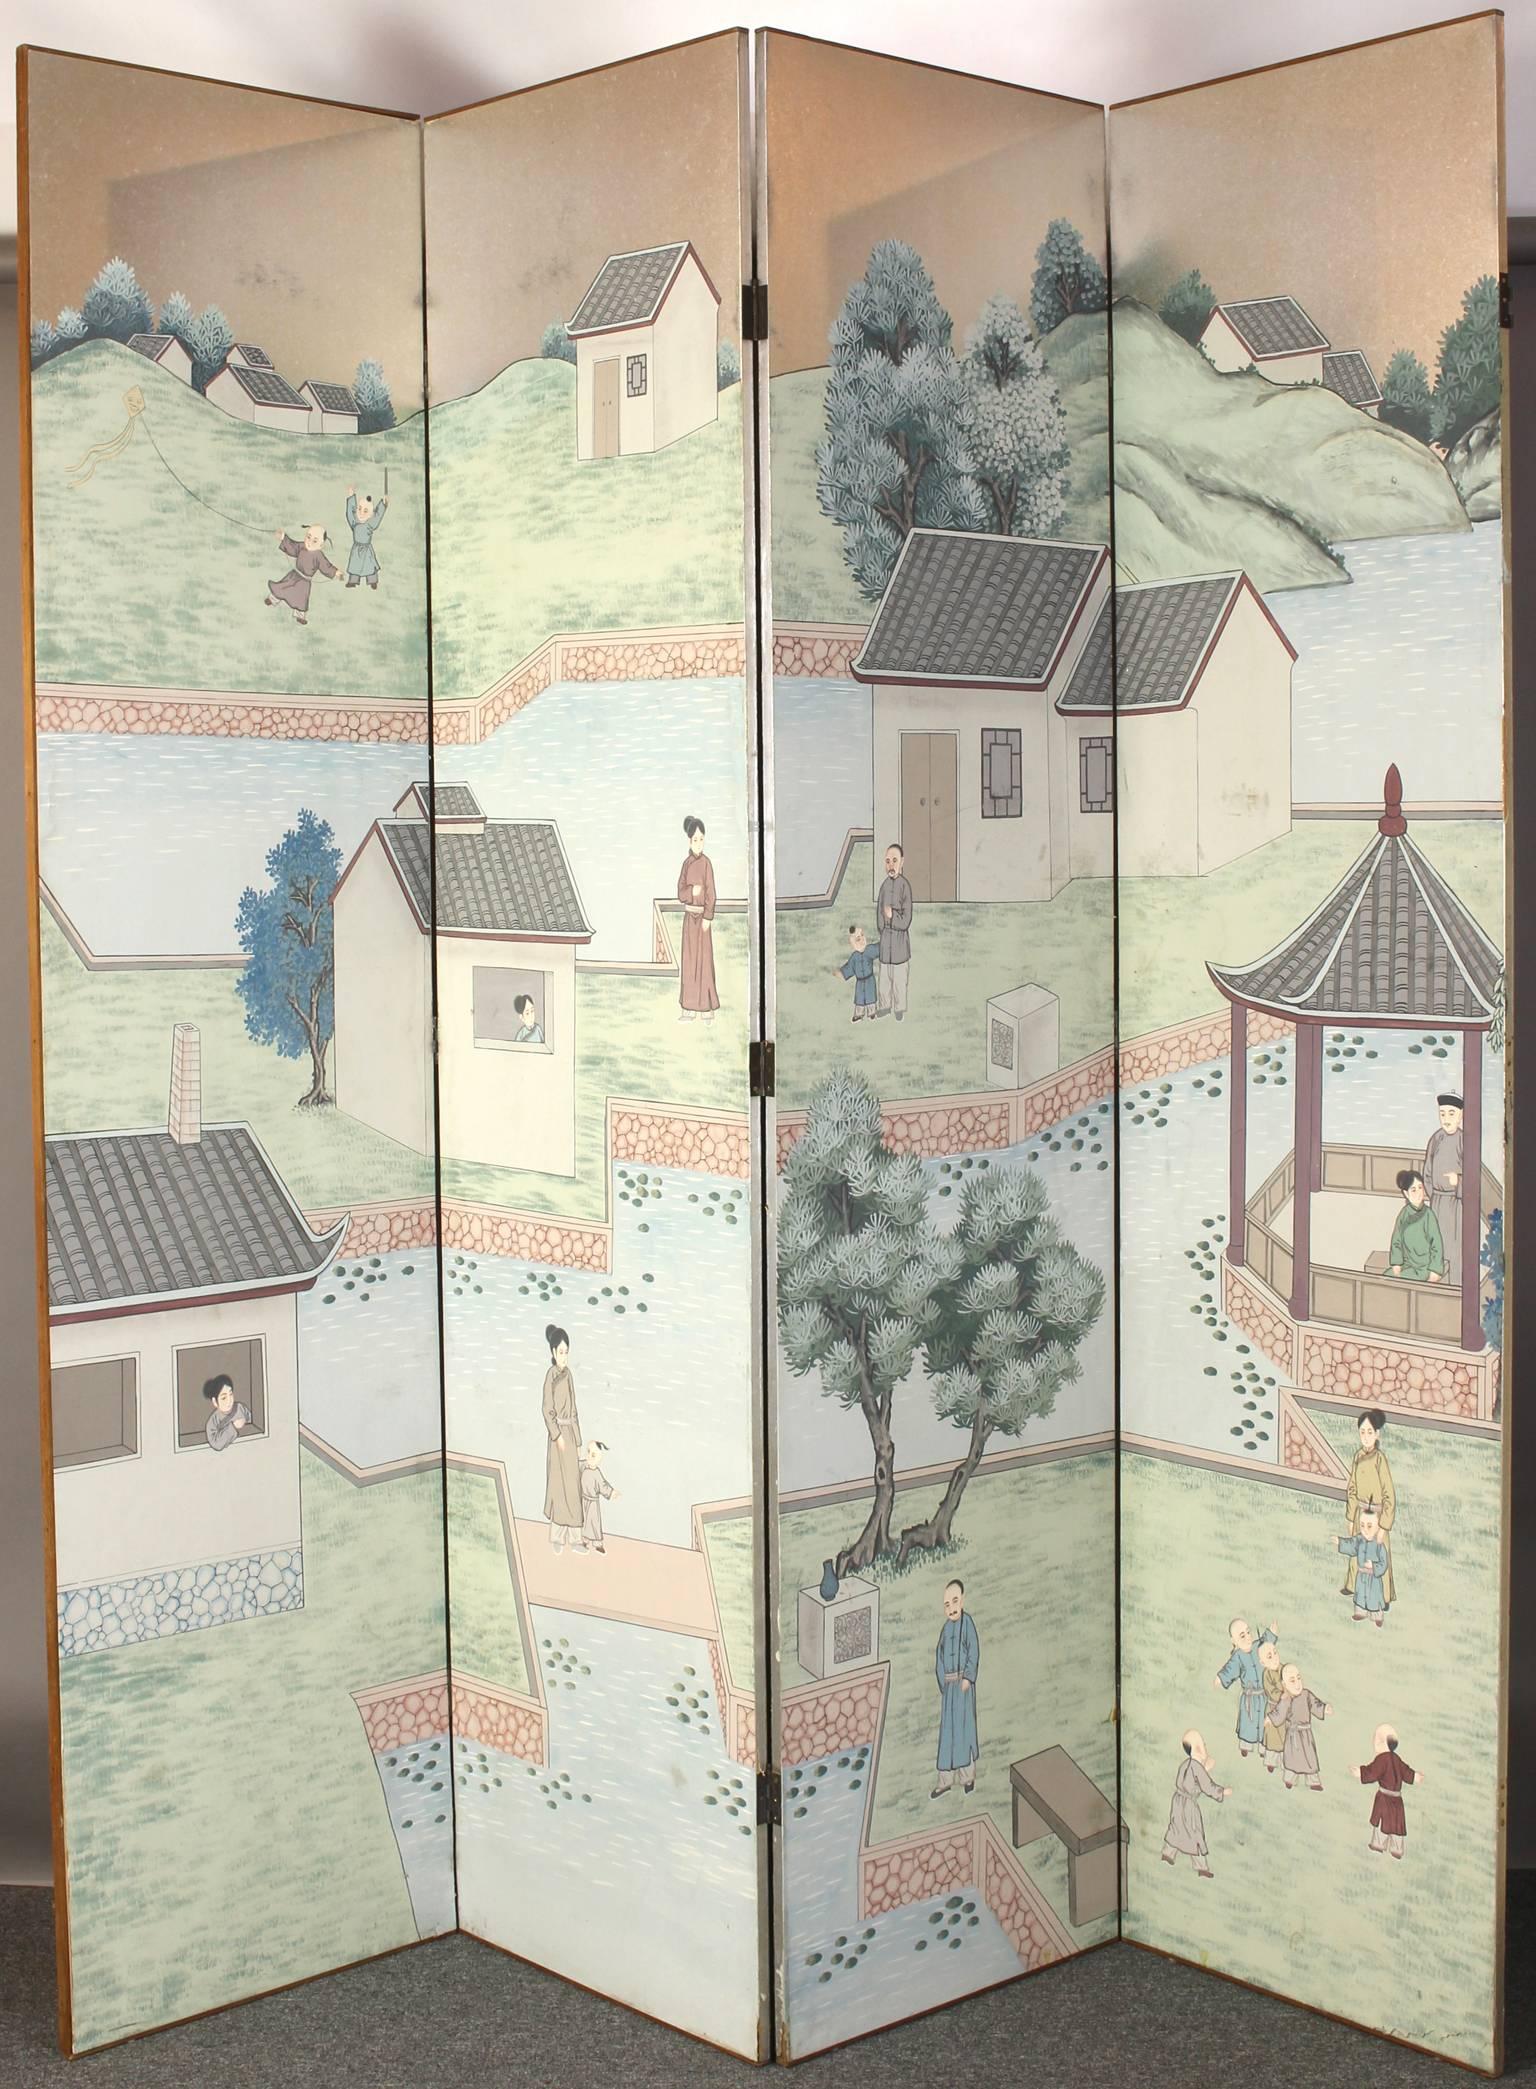 A very large eight-panel Chinese wooden folding screen beautifully painted on silver leaf paper depicting a waterfront village scene with buildings, pagodas and people including children at play.